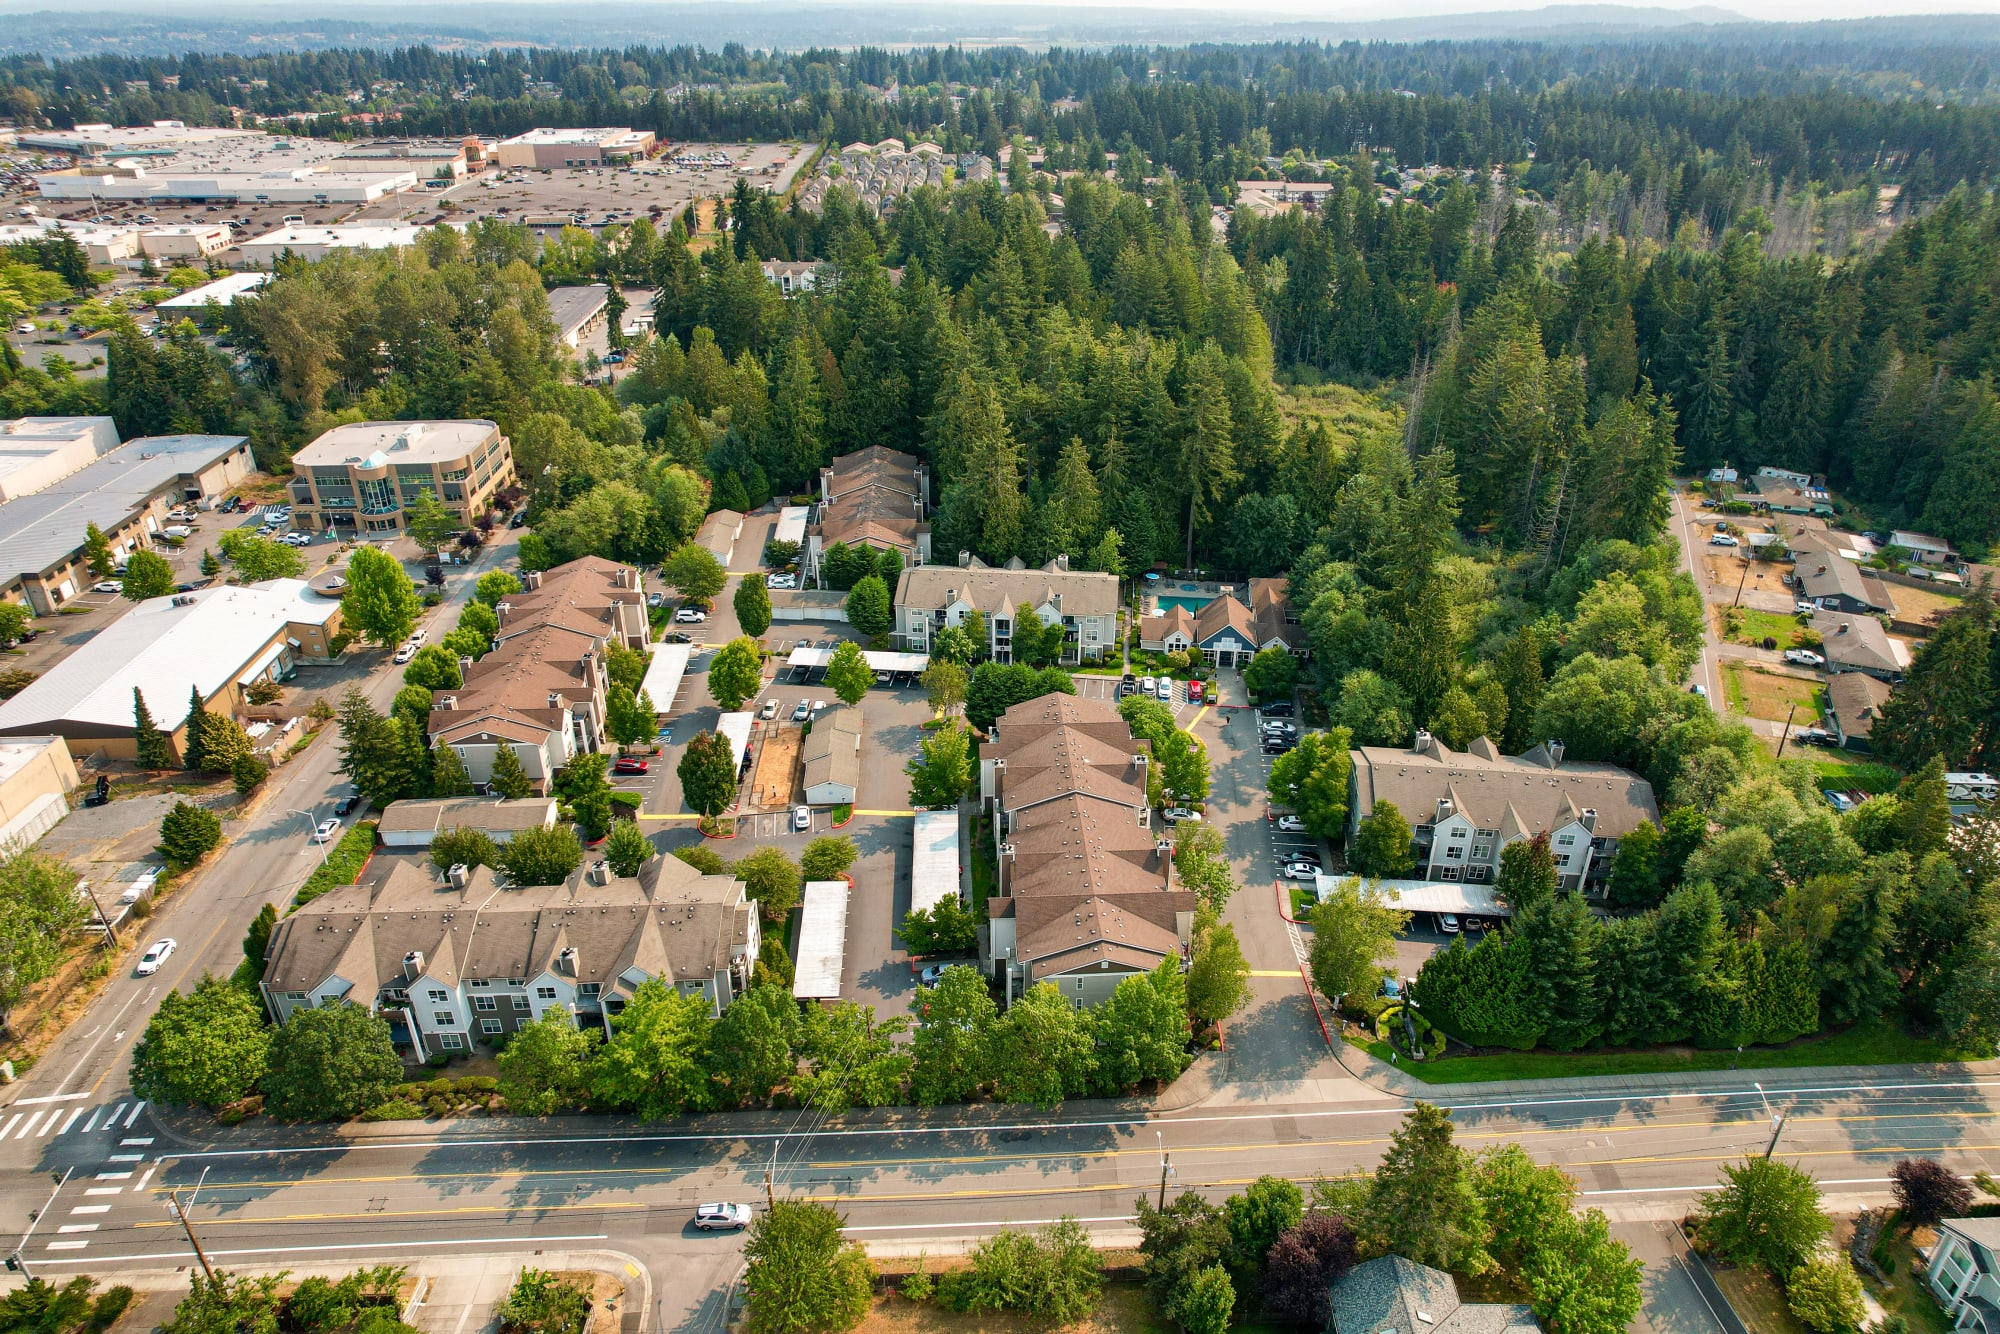 Aerial view of the property and surrounding area at Wildreed Apartments in Everett, Washington